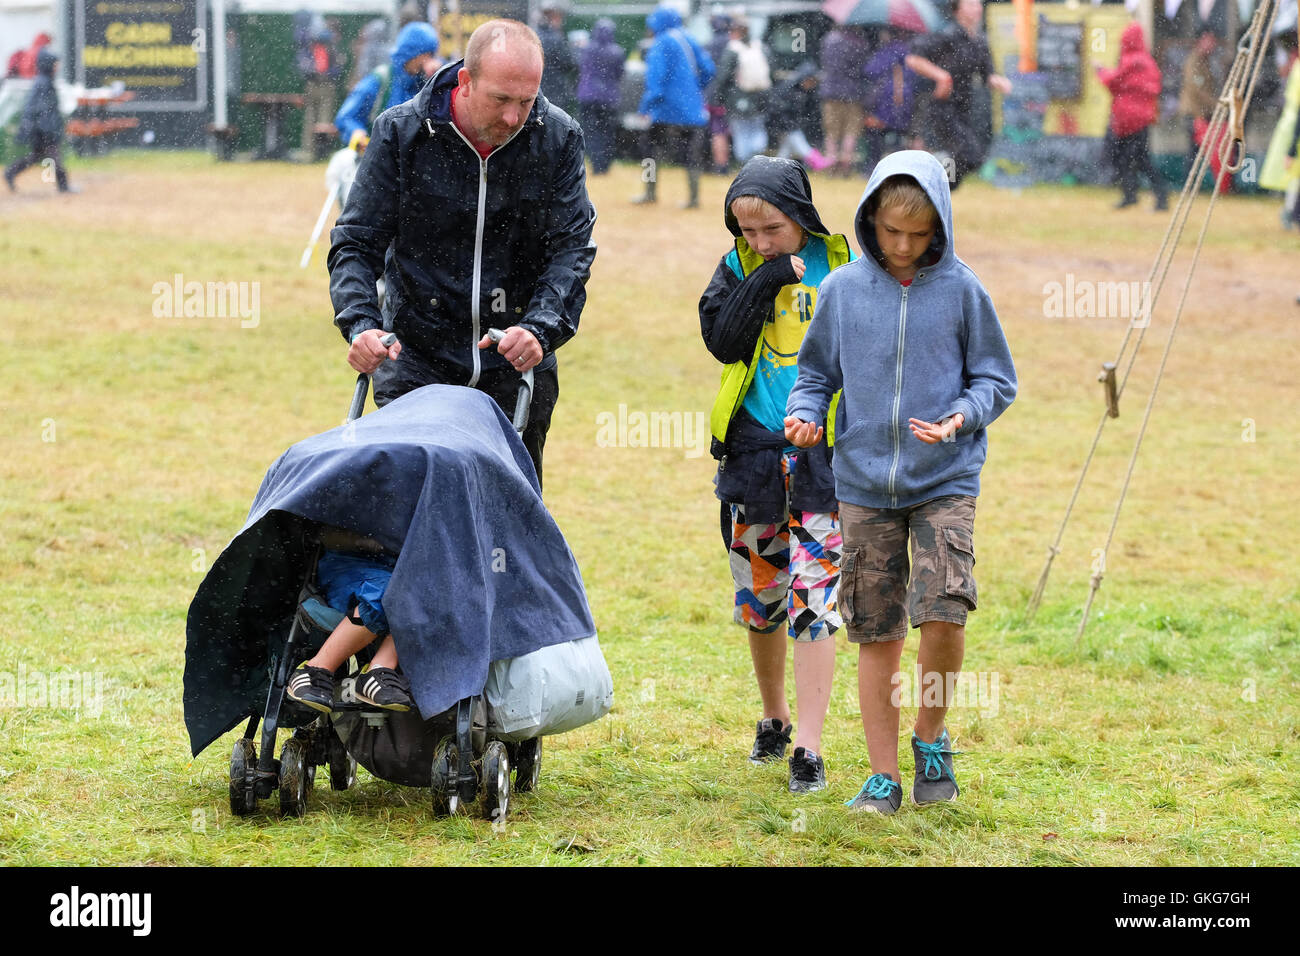 Green Man Festival, Crickhowell, Wales  - August 2016 - Rain and more rain at the Green Man Festival with occasional moments of sunshine - A family does its best to stay dry during another heavy shower. Stock Photo